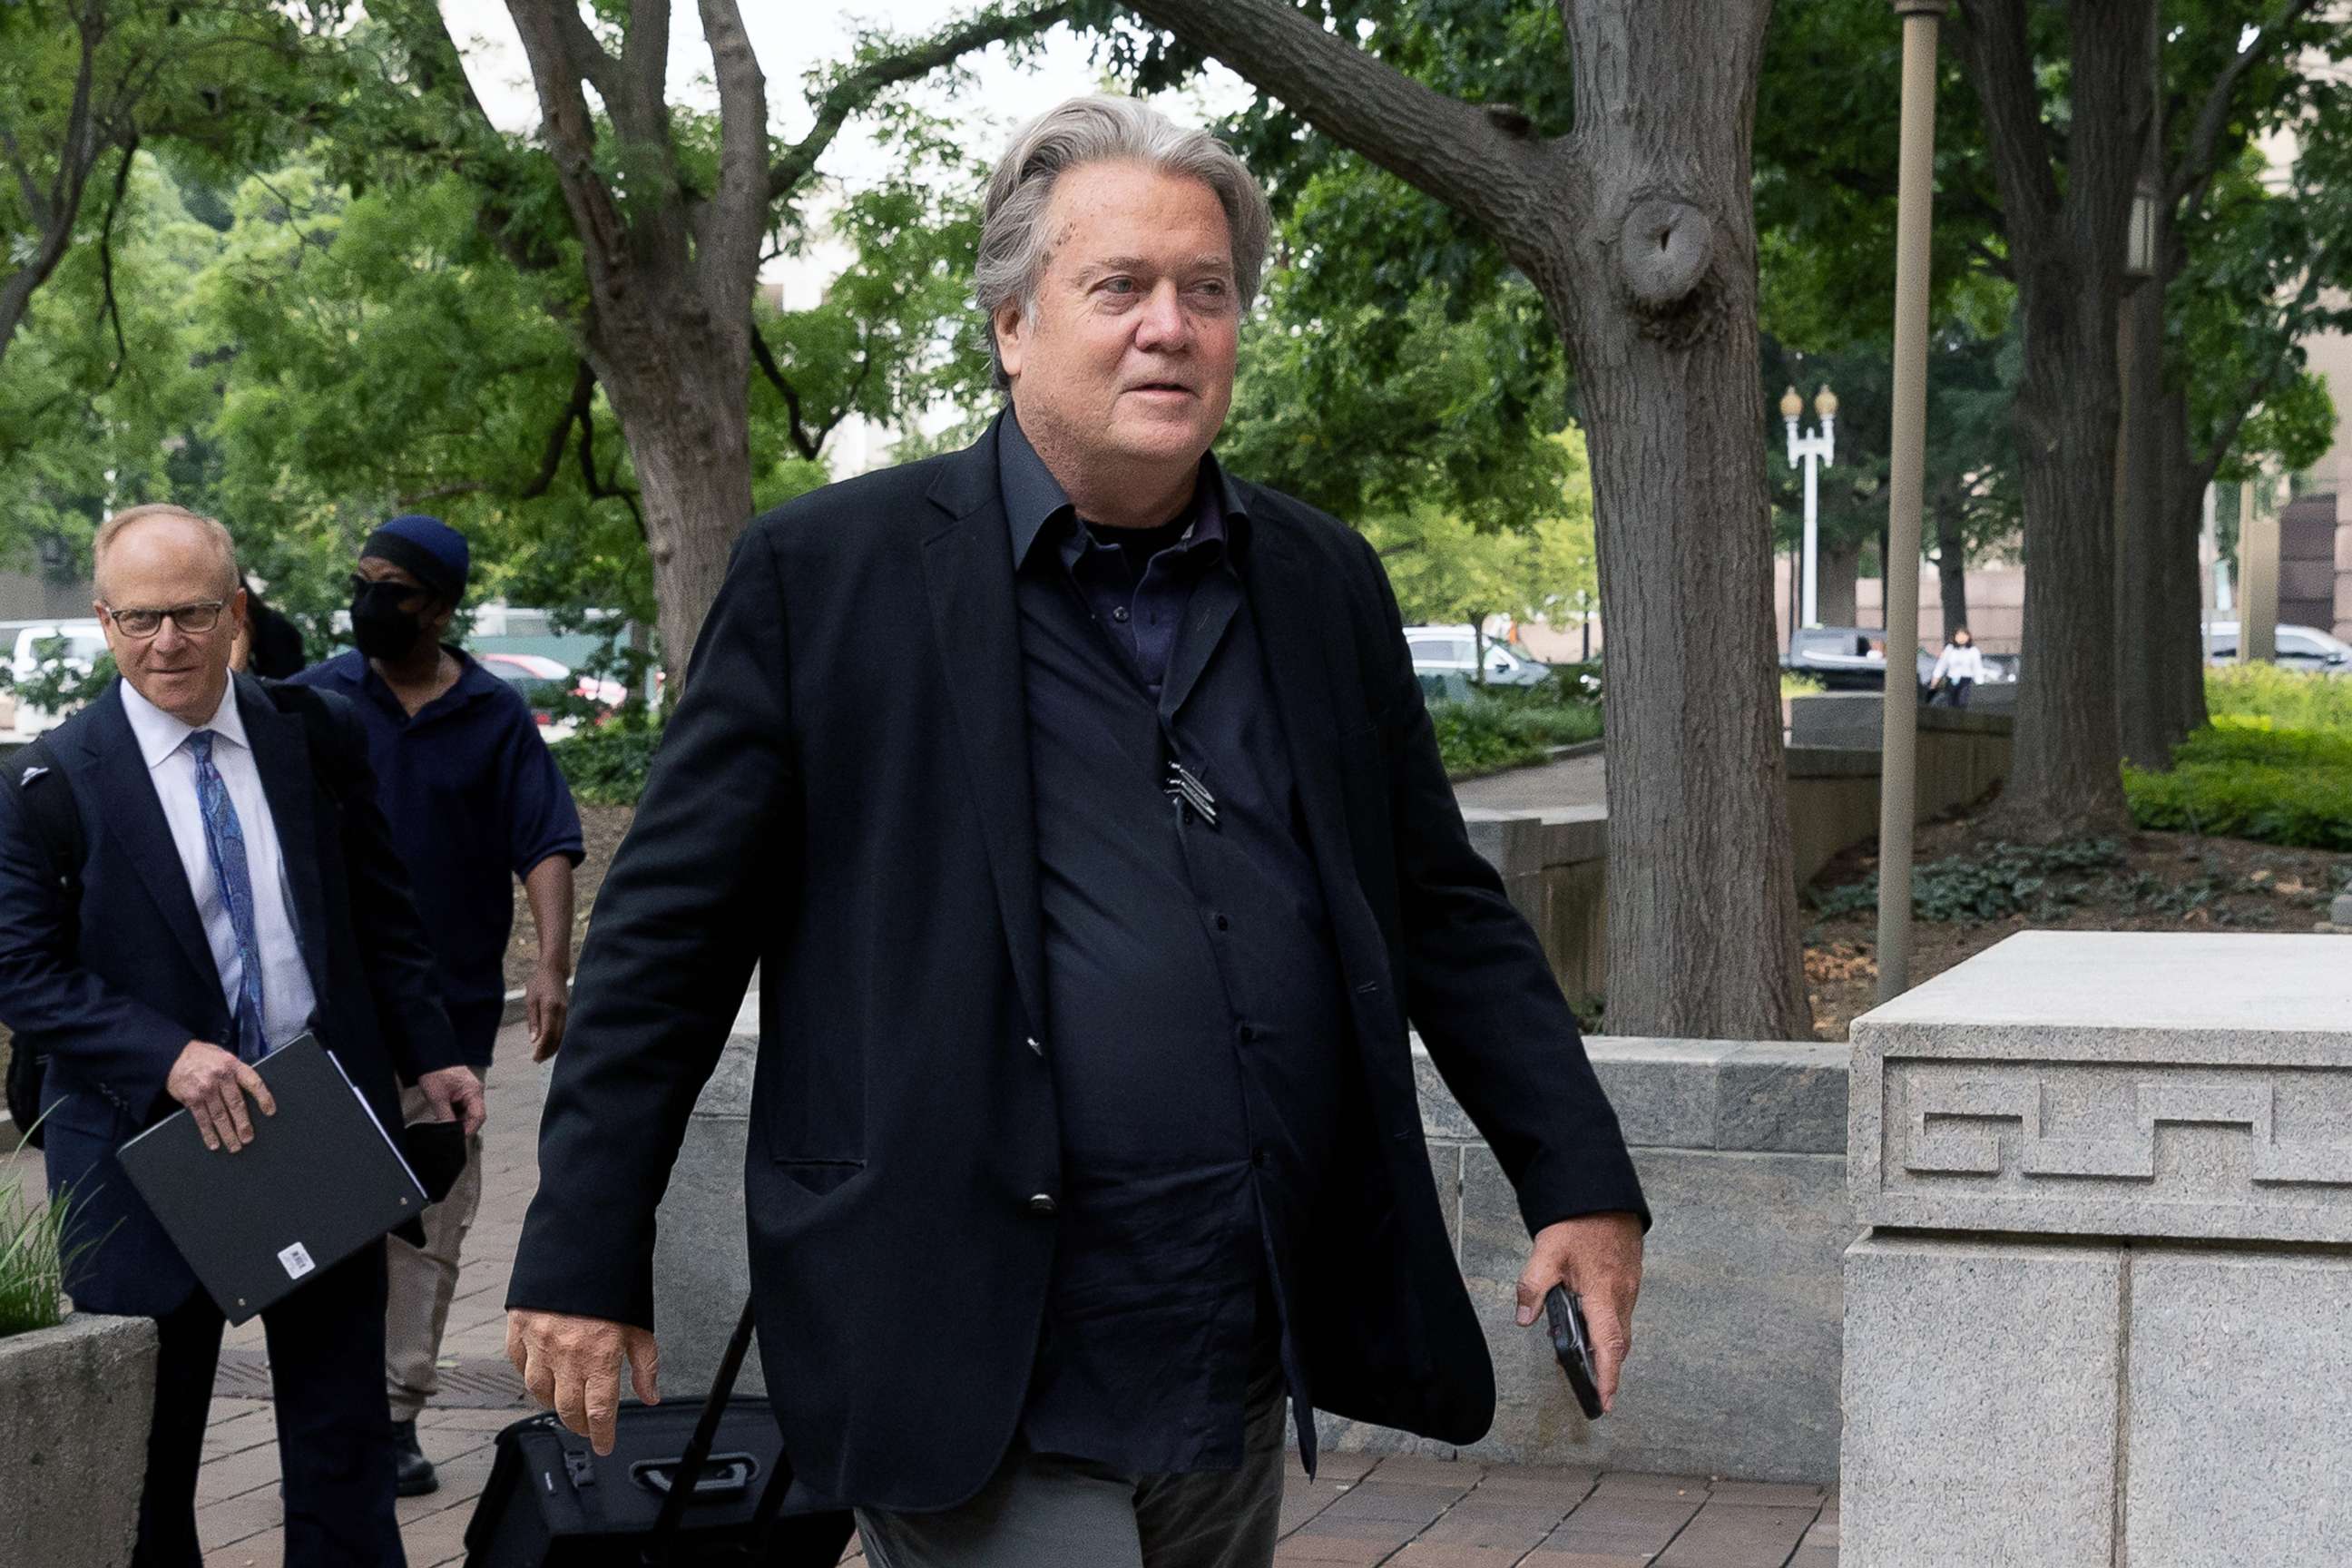 PHOTO: Former White House Chief Strategist in the Trump administration Steven Bannon (R) arrives with attorney David Schoen (L) at the E. Barrett Prettyman Federal Courthouse in Washington, D.C., July 18, 2022.